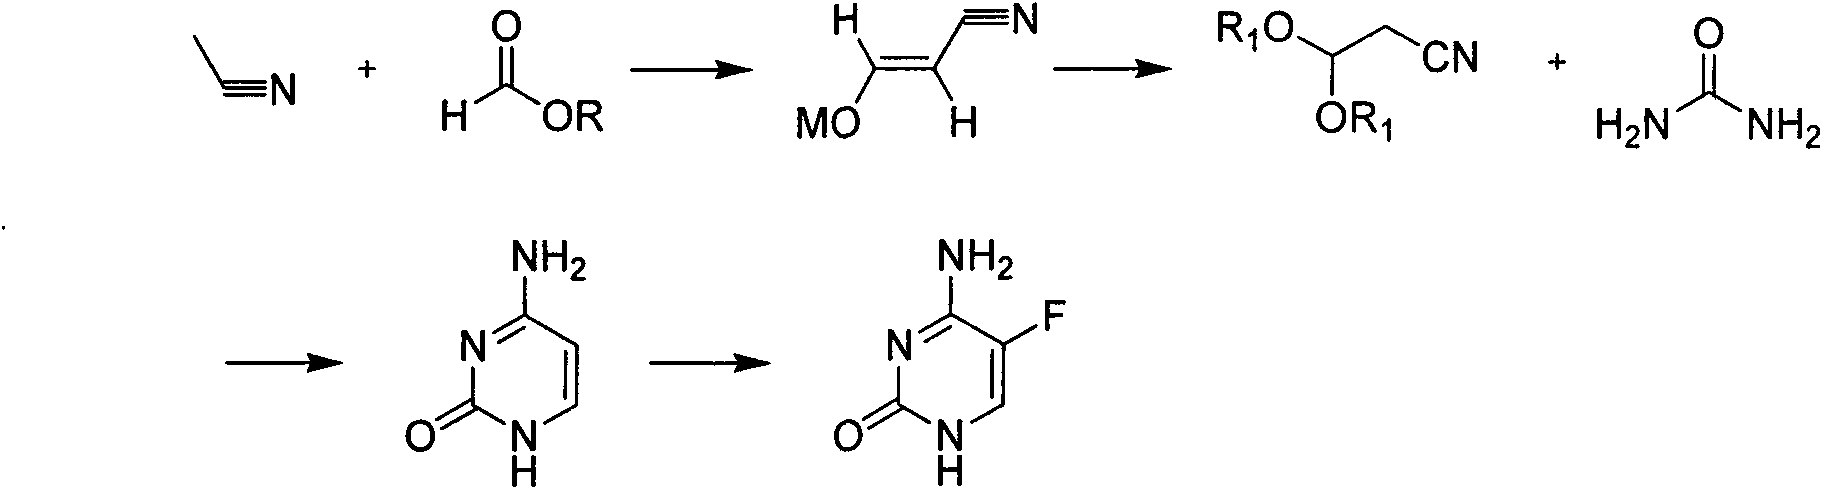 Novel technology for synthesis of 5-flucytosine